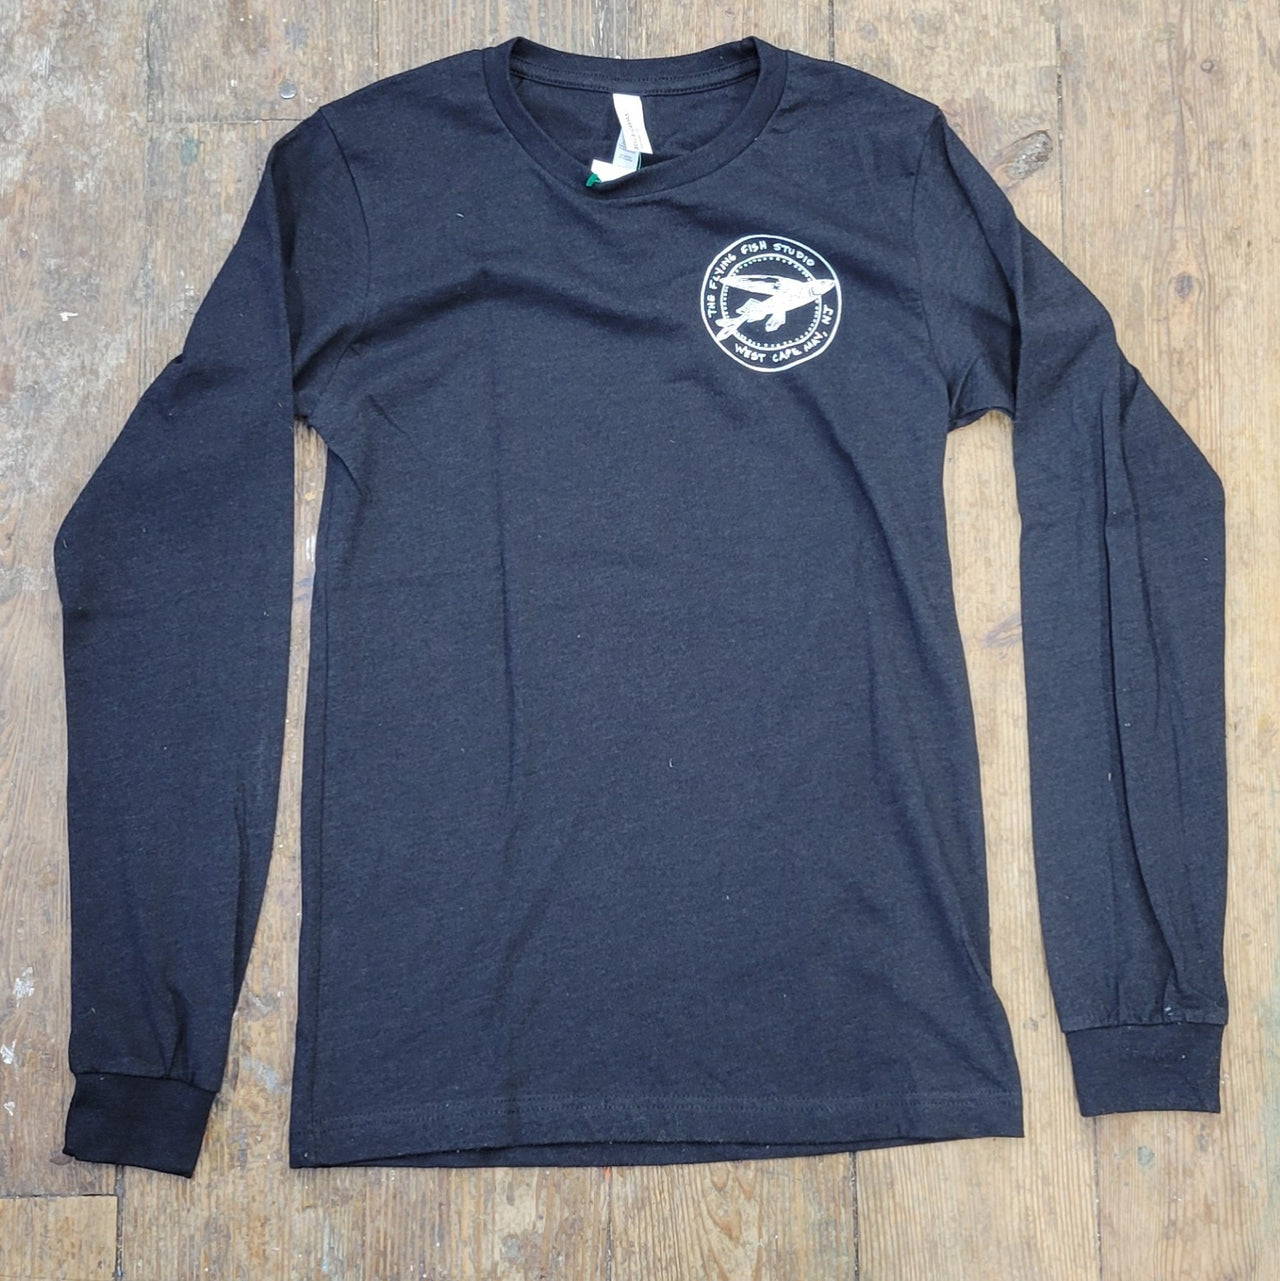 Heather, black long-sleeve with the 'Flying Fish' logo on the left chest in white ink.